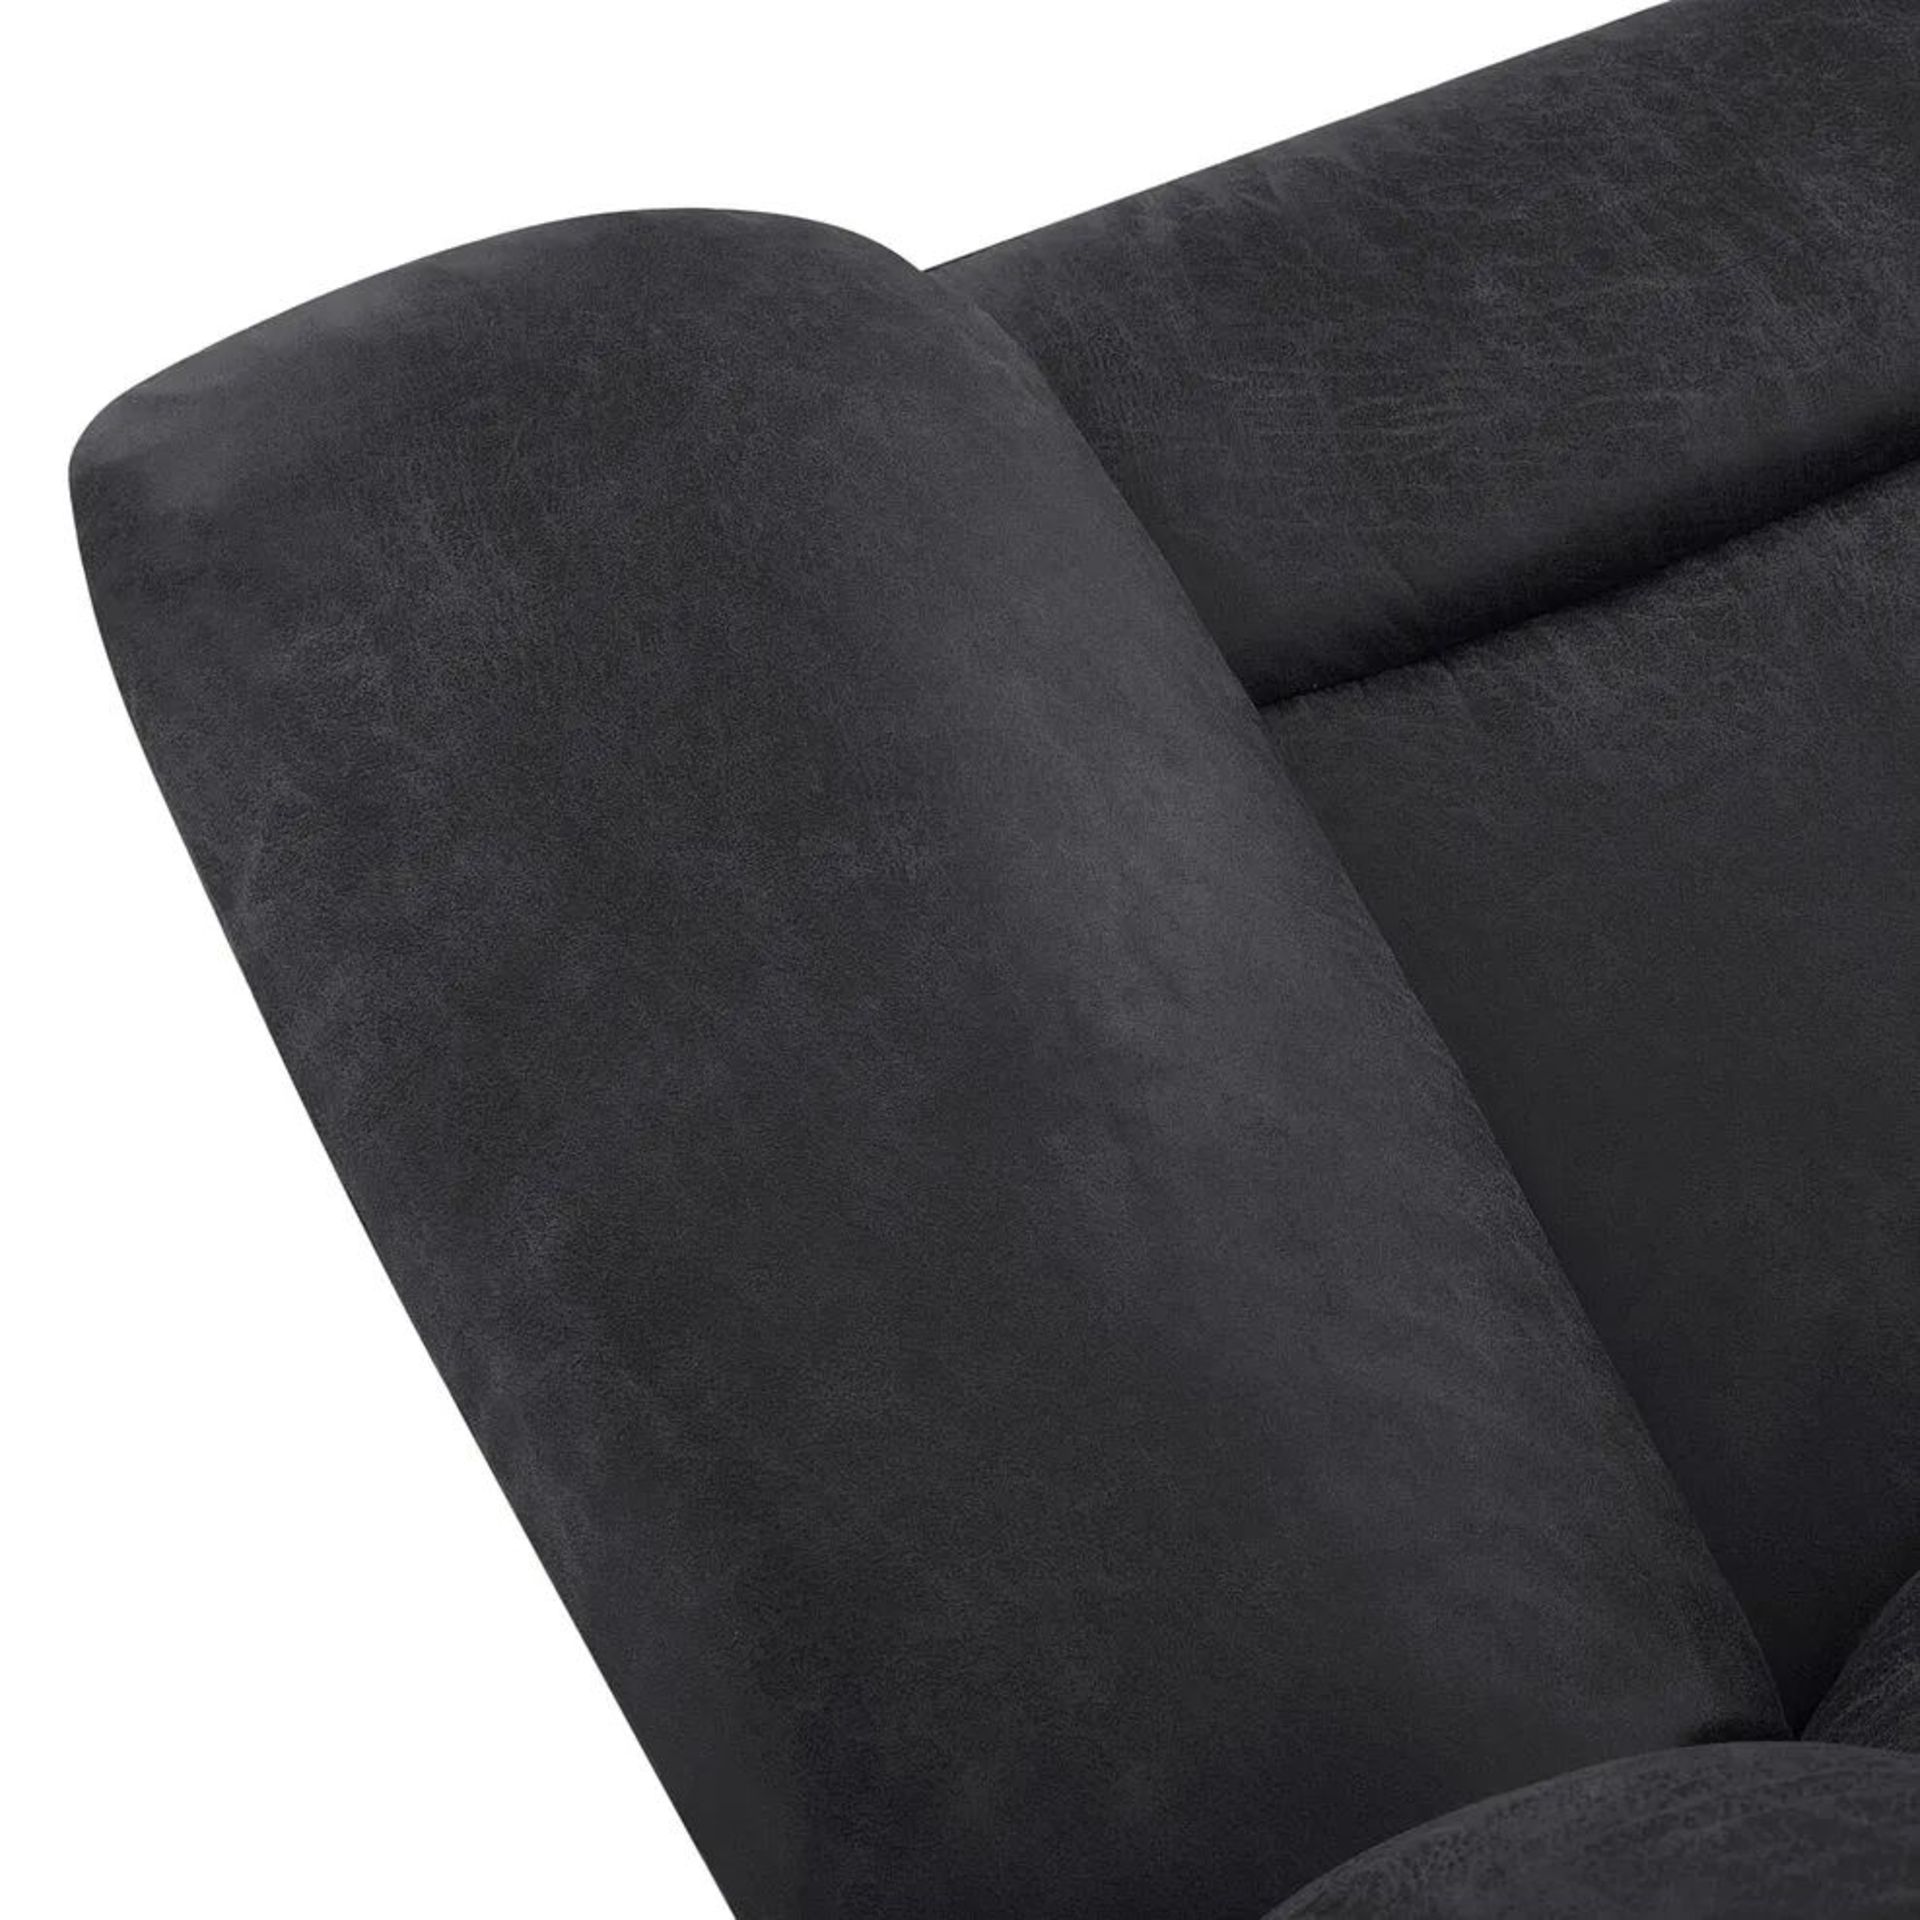 BRAND NEW MARLOW 3 Seater Electric Recliner Sofa - MILLER GREY FABRIC. RRP £1199. Designed to suit - Bild 11 aus 12